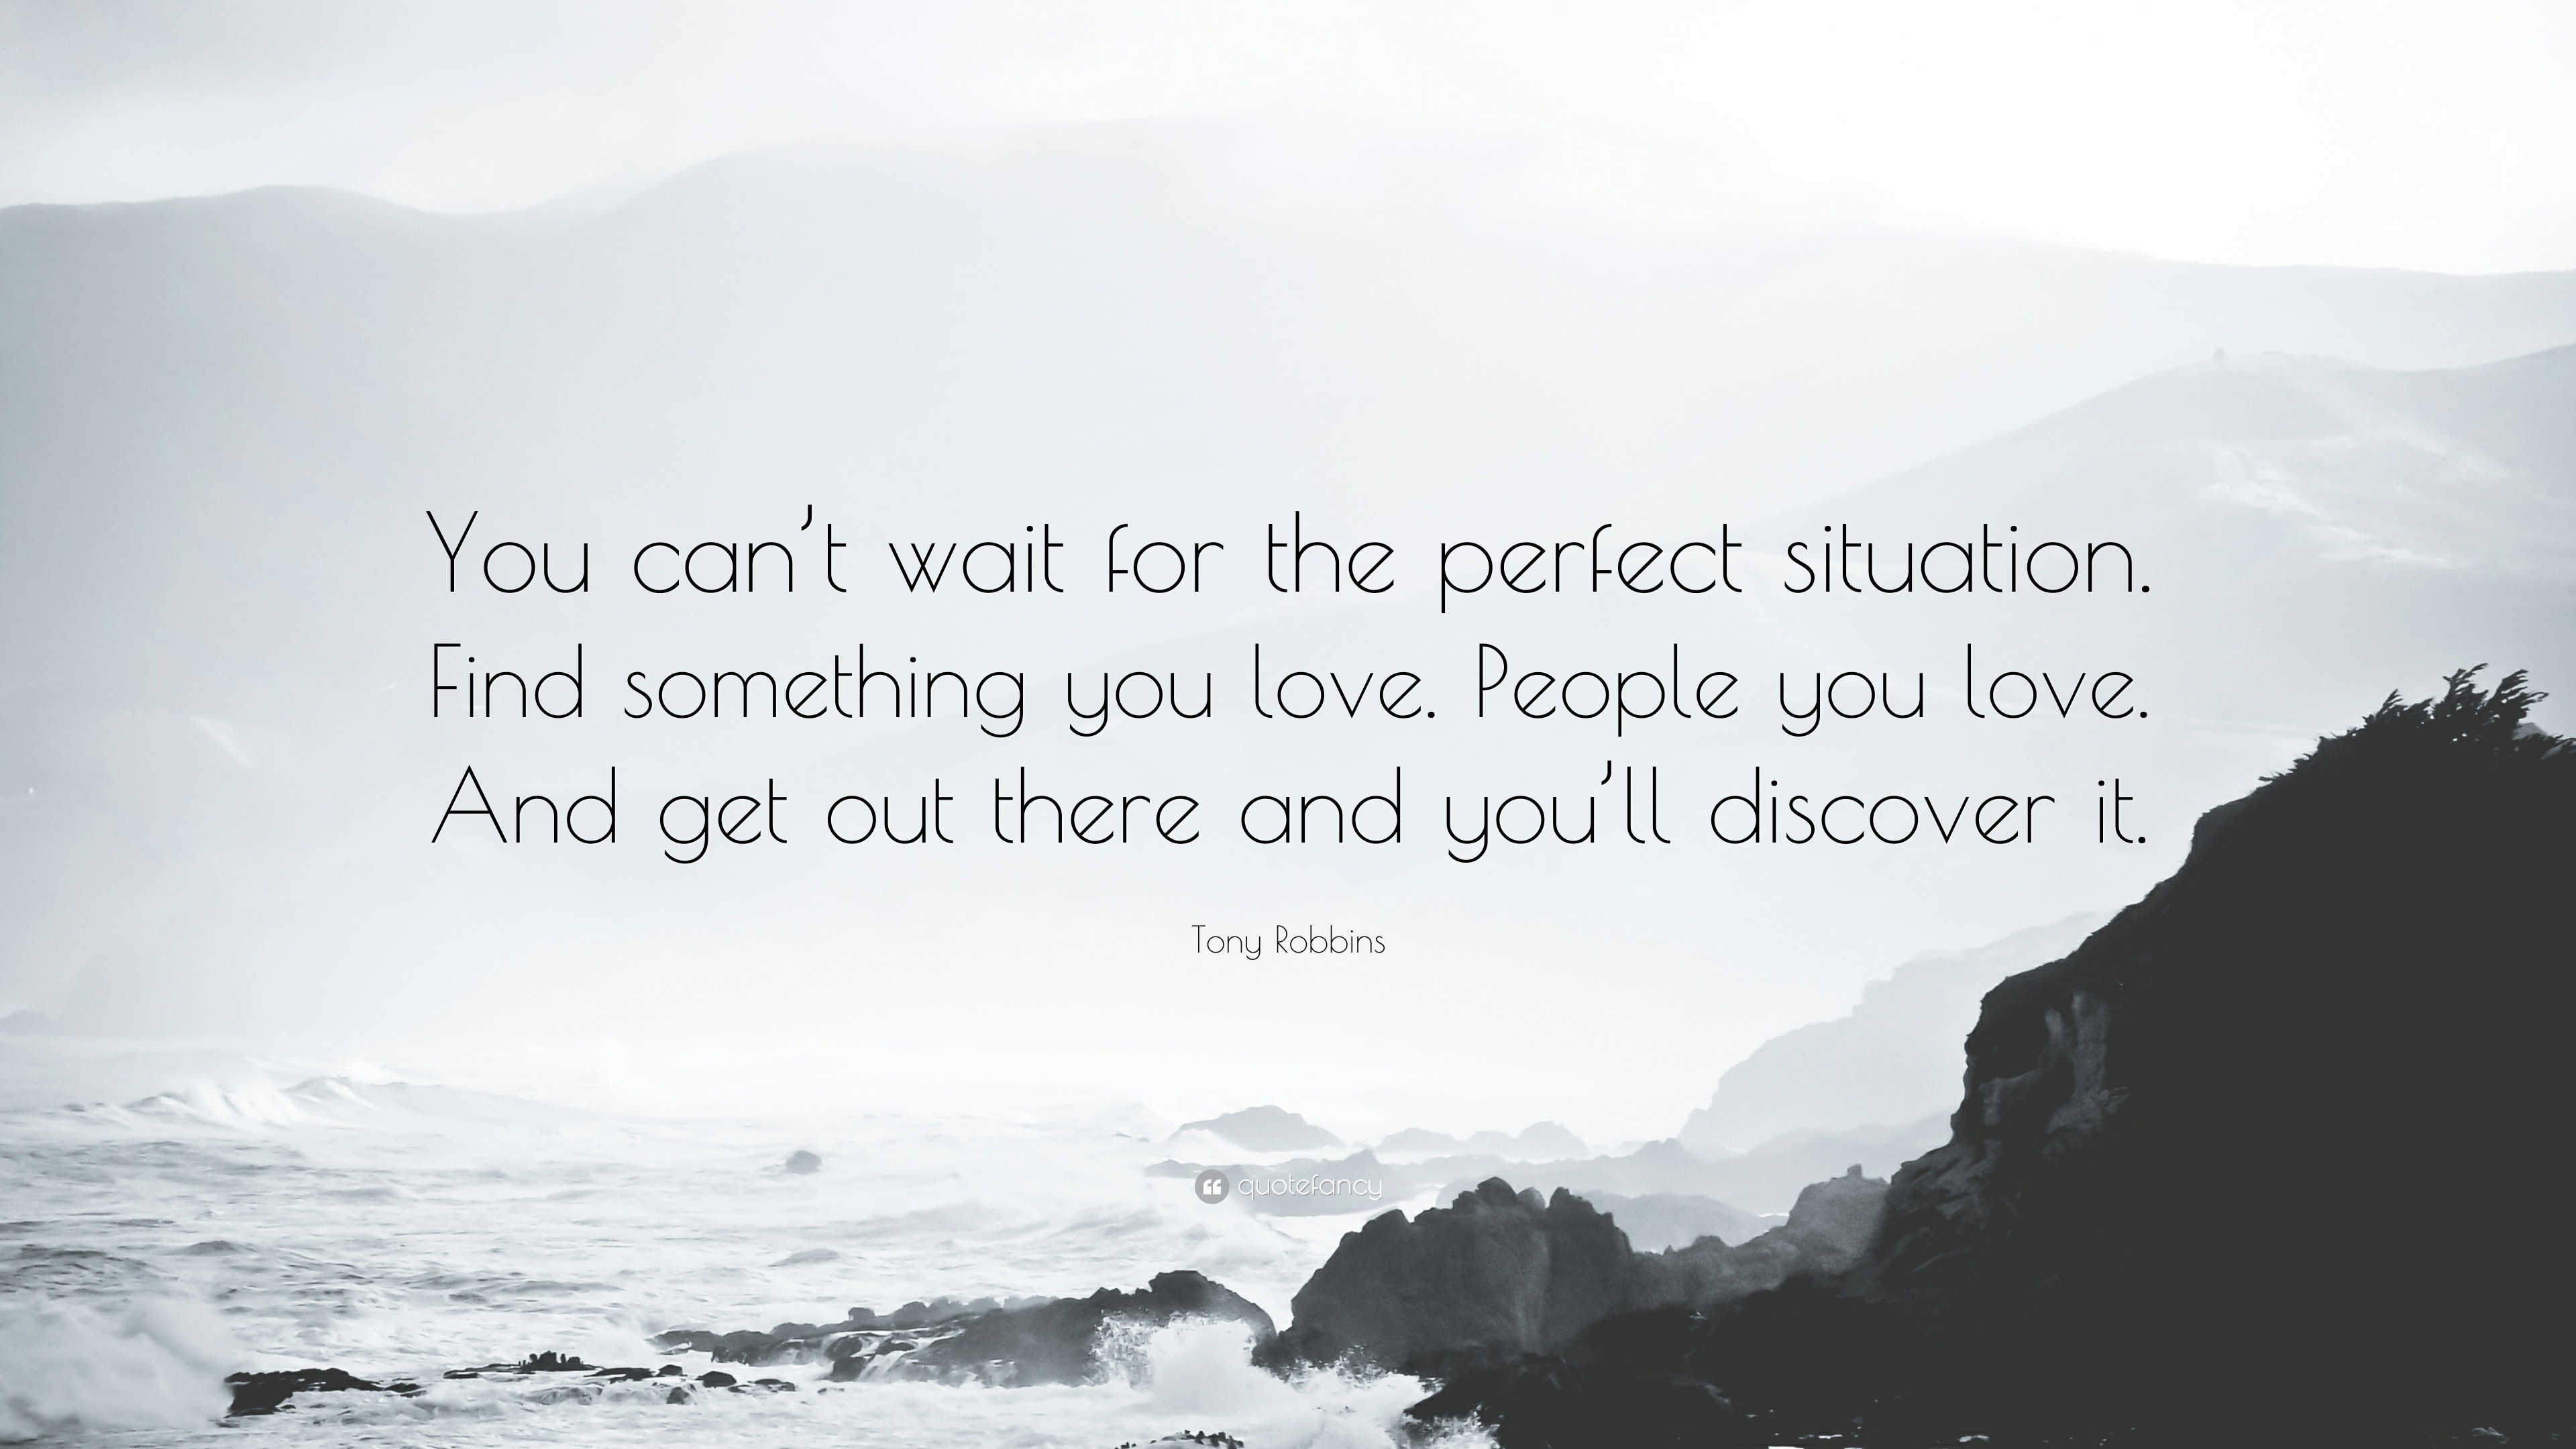 Tony Robbins Quote “You can t wait for the perfect situation Find